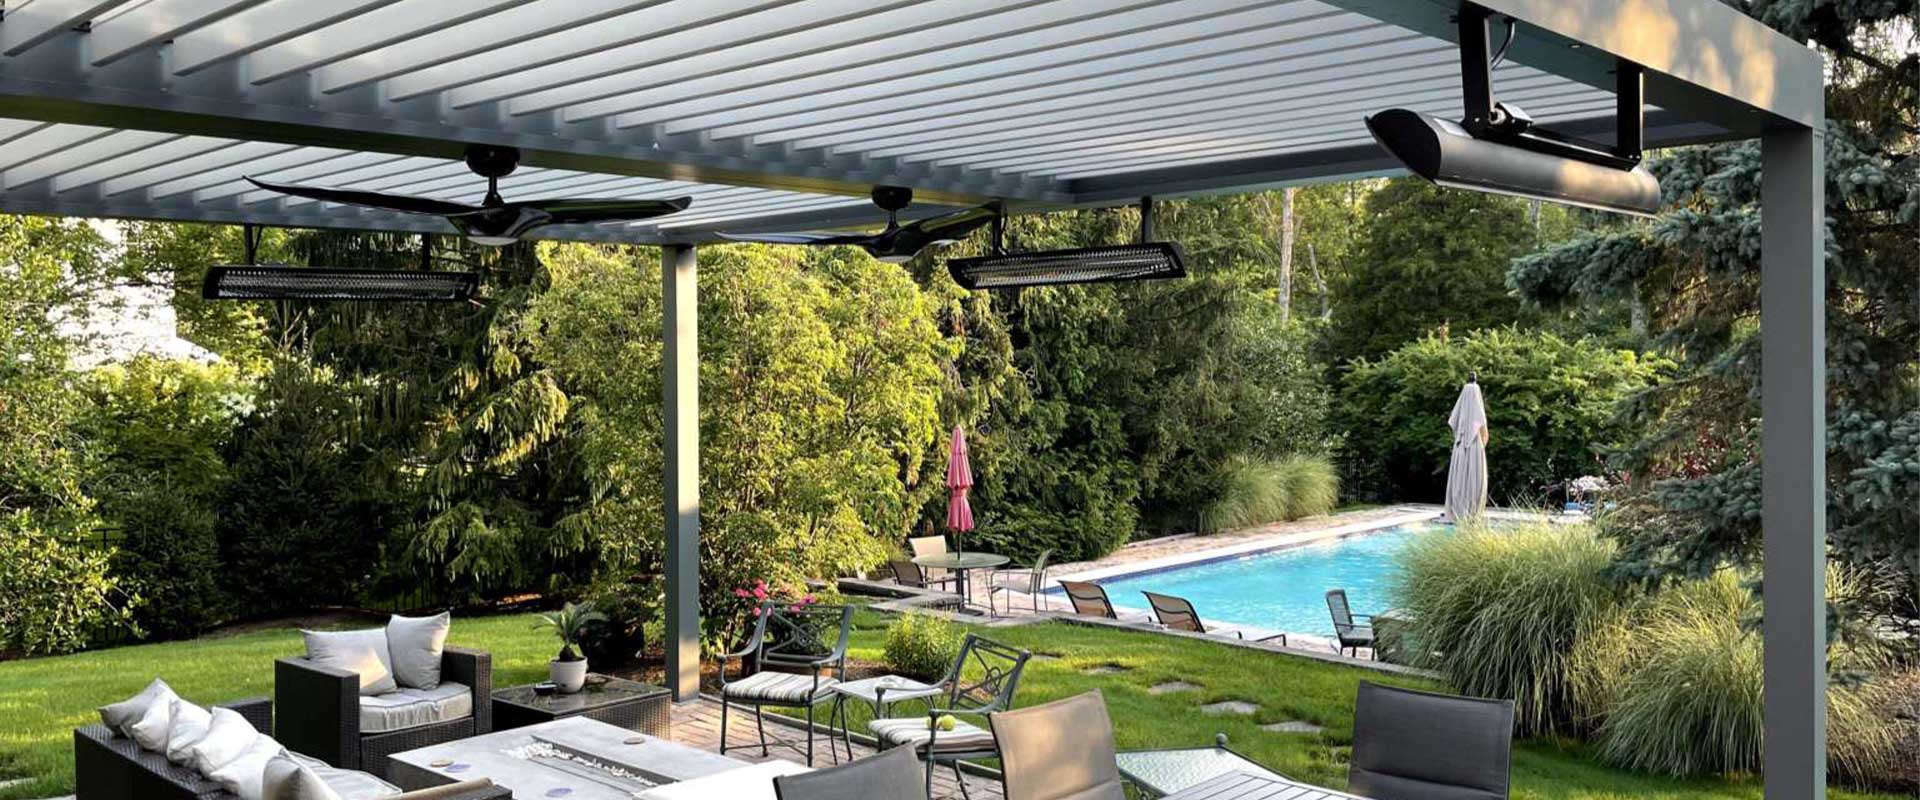 Breslow's Blog Img of louvered roof